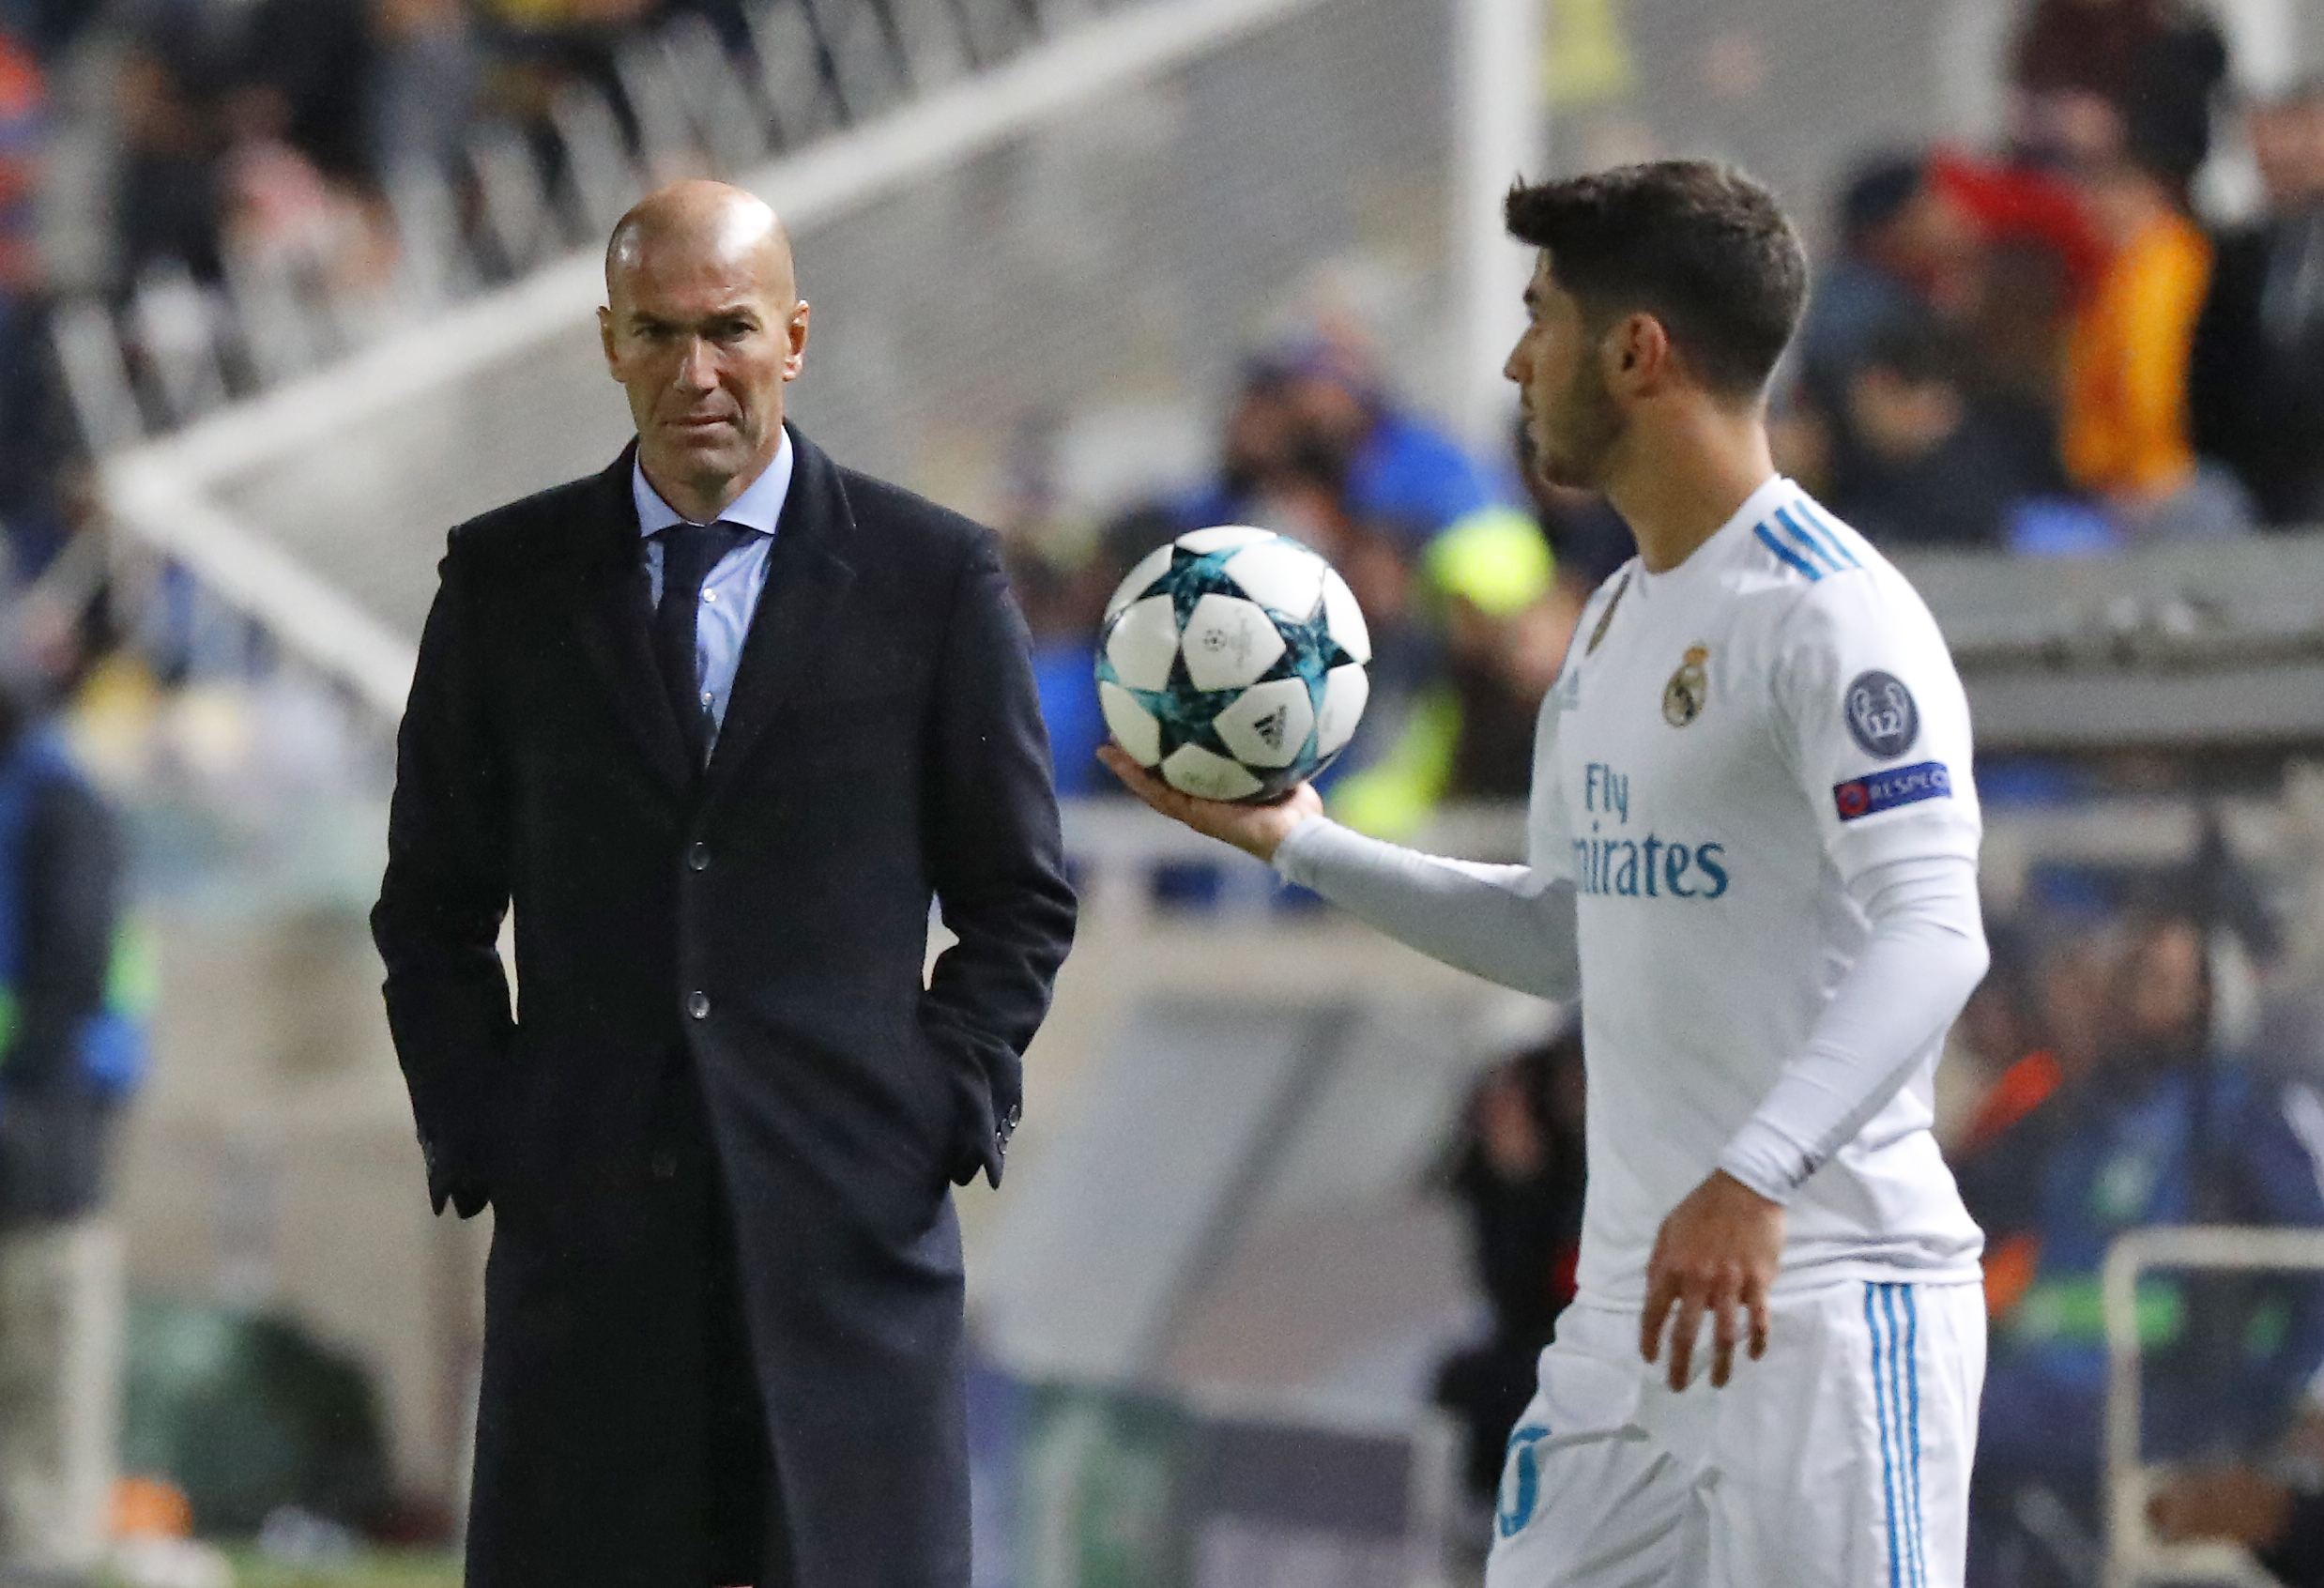 Real Madrid's Spanish midfielder Marco Asensio and Real Madrid's French head coach Zinedine Zidane are seen the UEFA Champions League Group H match between Apoel FC and Real Madrid on November 21, 2017, in the Cypriot capital Nicosia's GSP Stadium.  / AFP PHOTO / Jack GUEZ        (Photo credit should read JACK GUEZ/AFP/Getty Images)